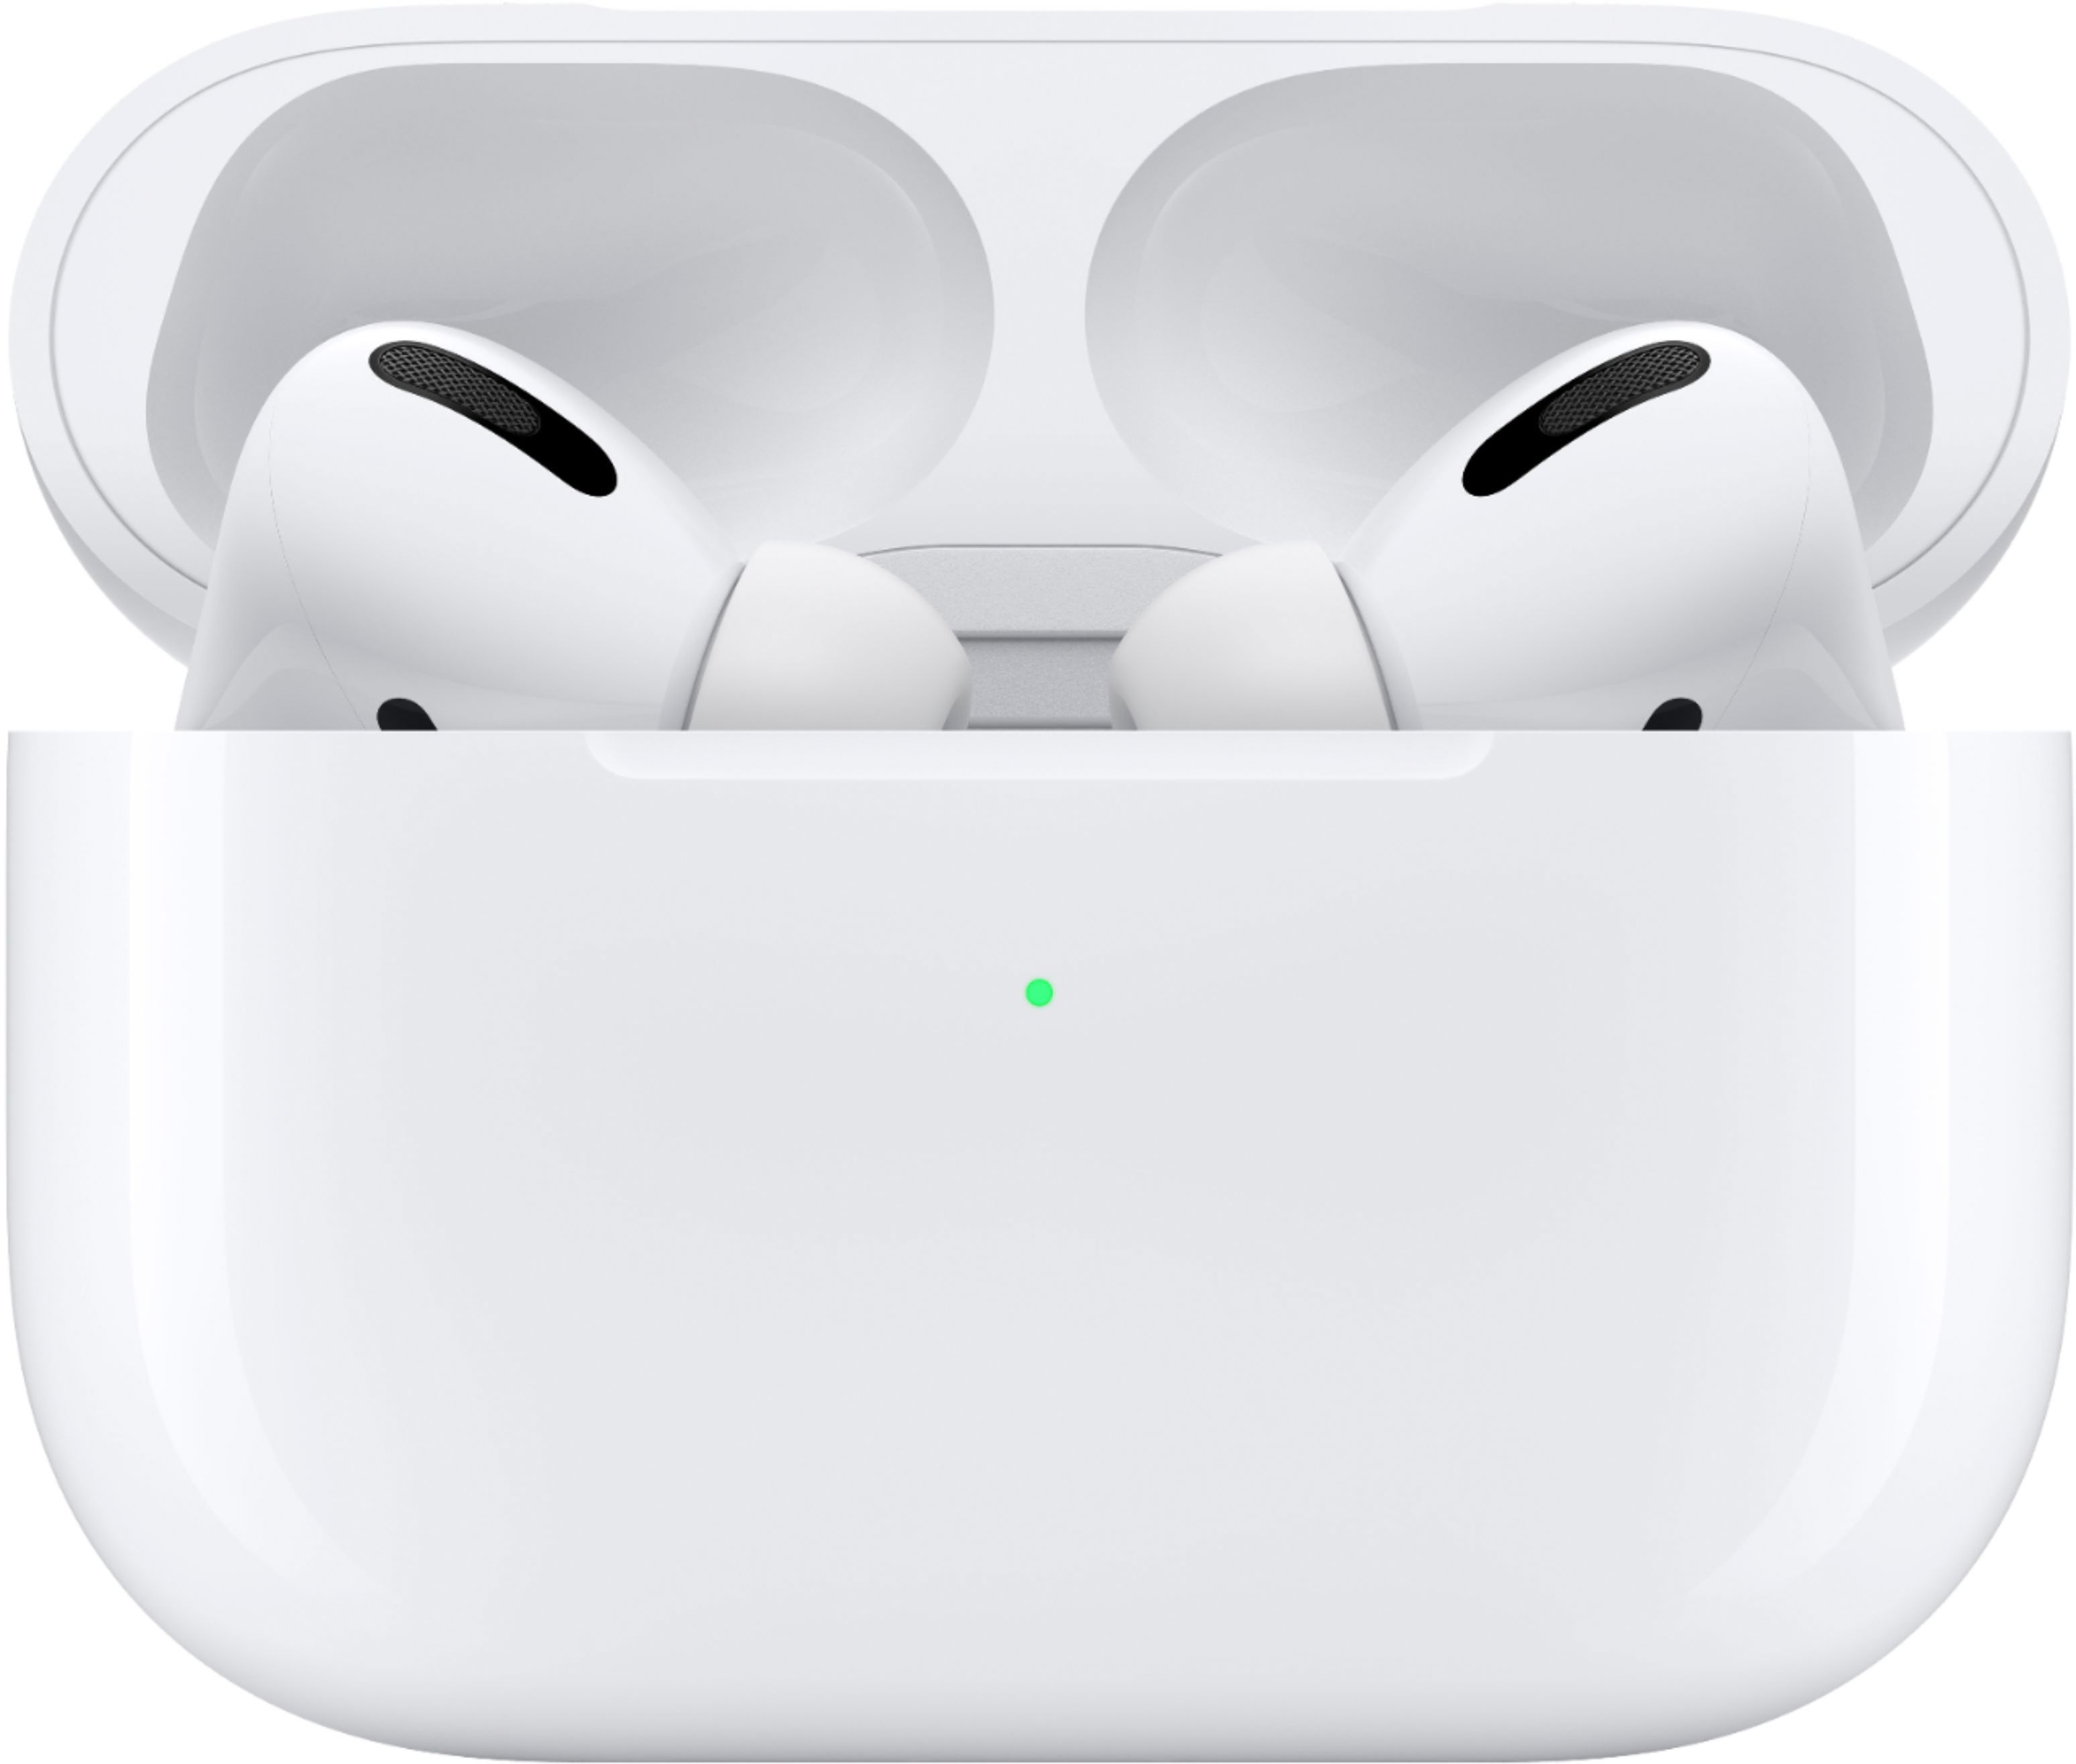 air pods pro magsafe charging case